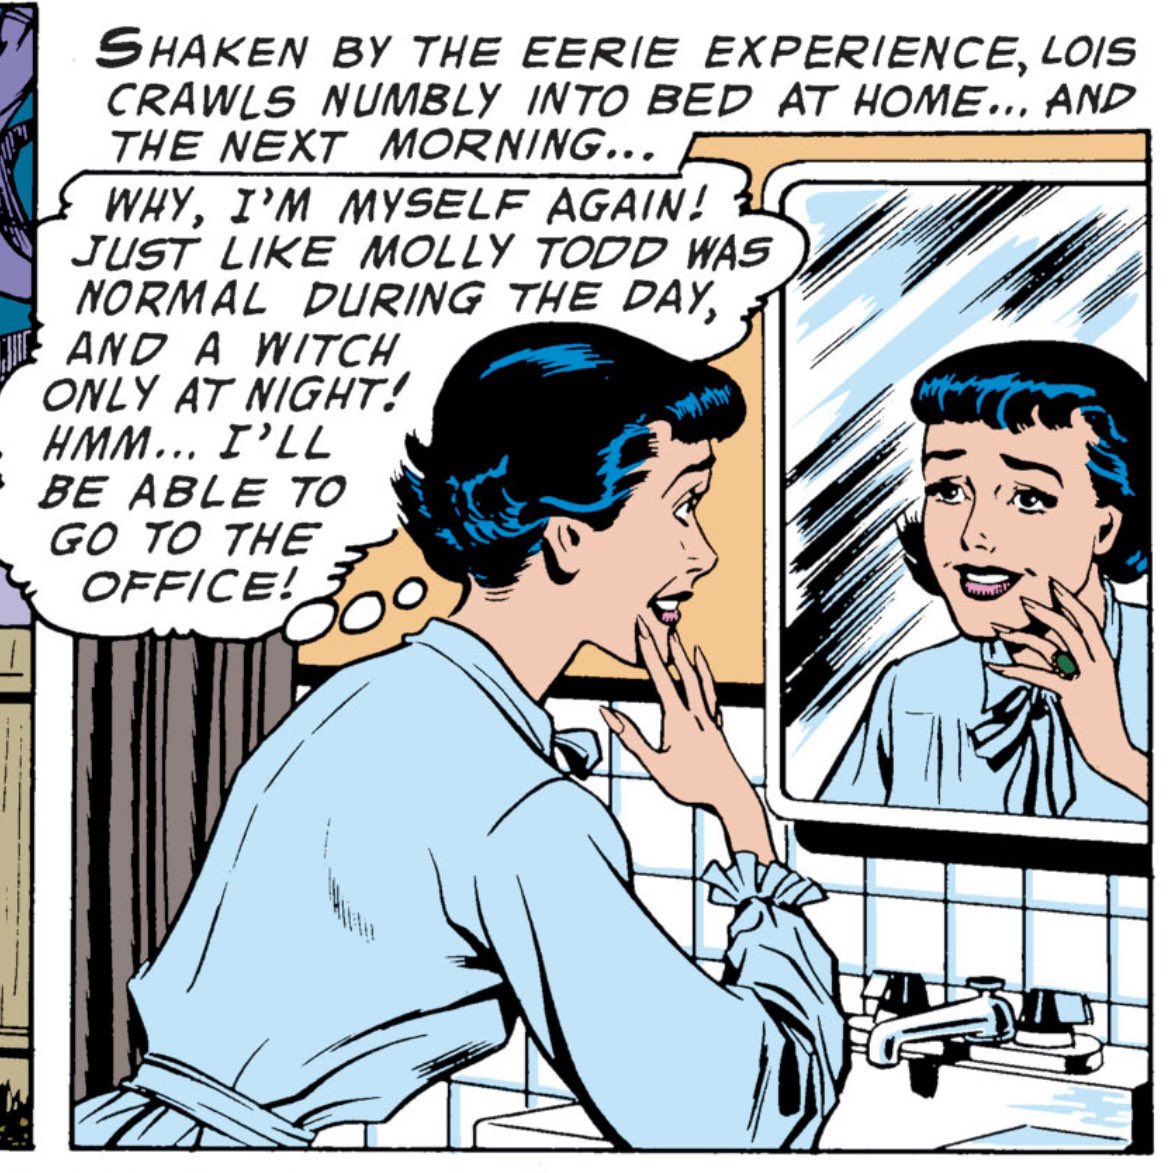 It was a different time etc, but Kurt Schaffenberger's Lois Lane is, like, preposterously cute 